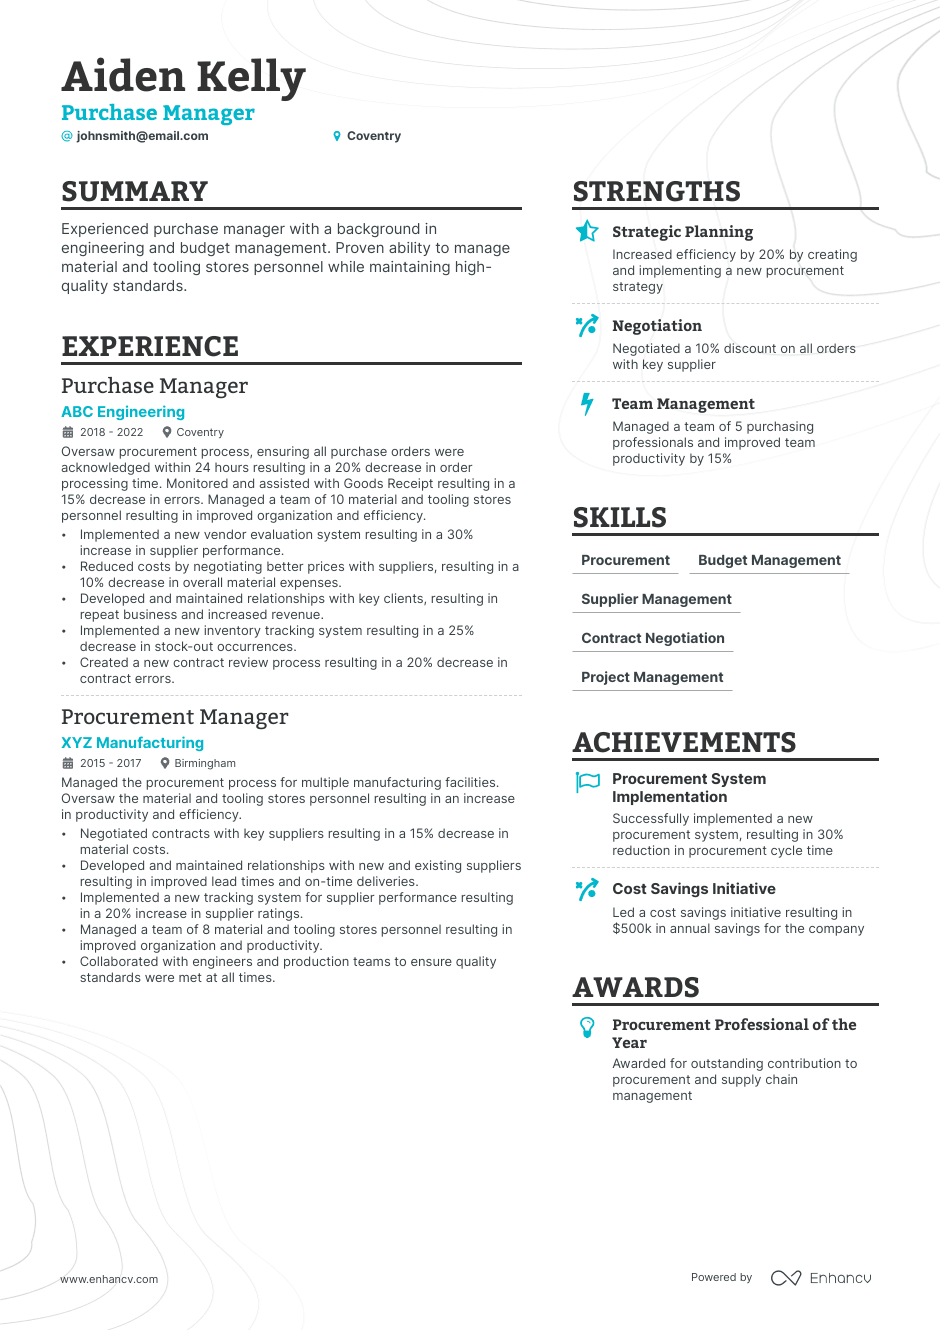 Purchase Manager resume example